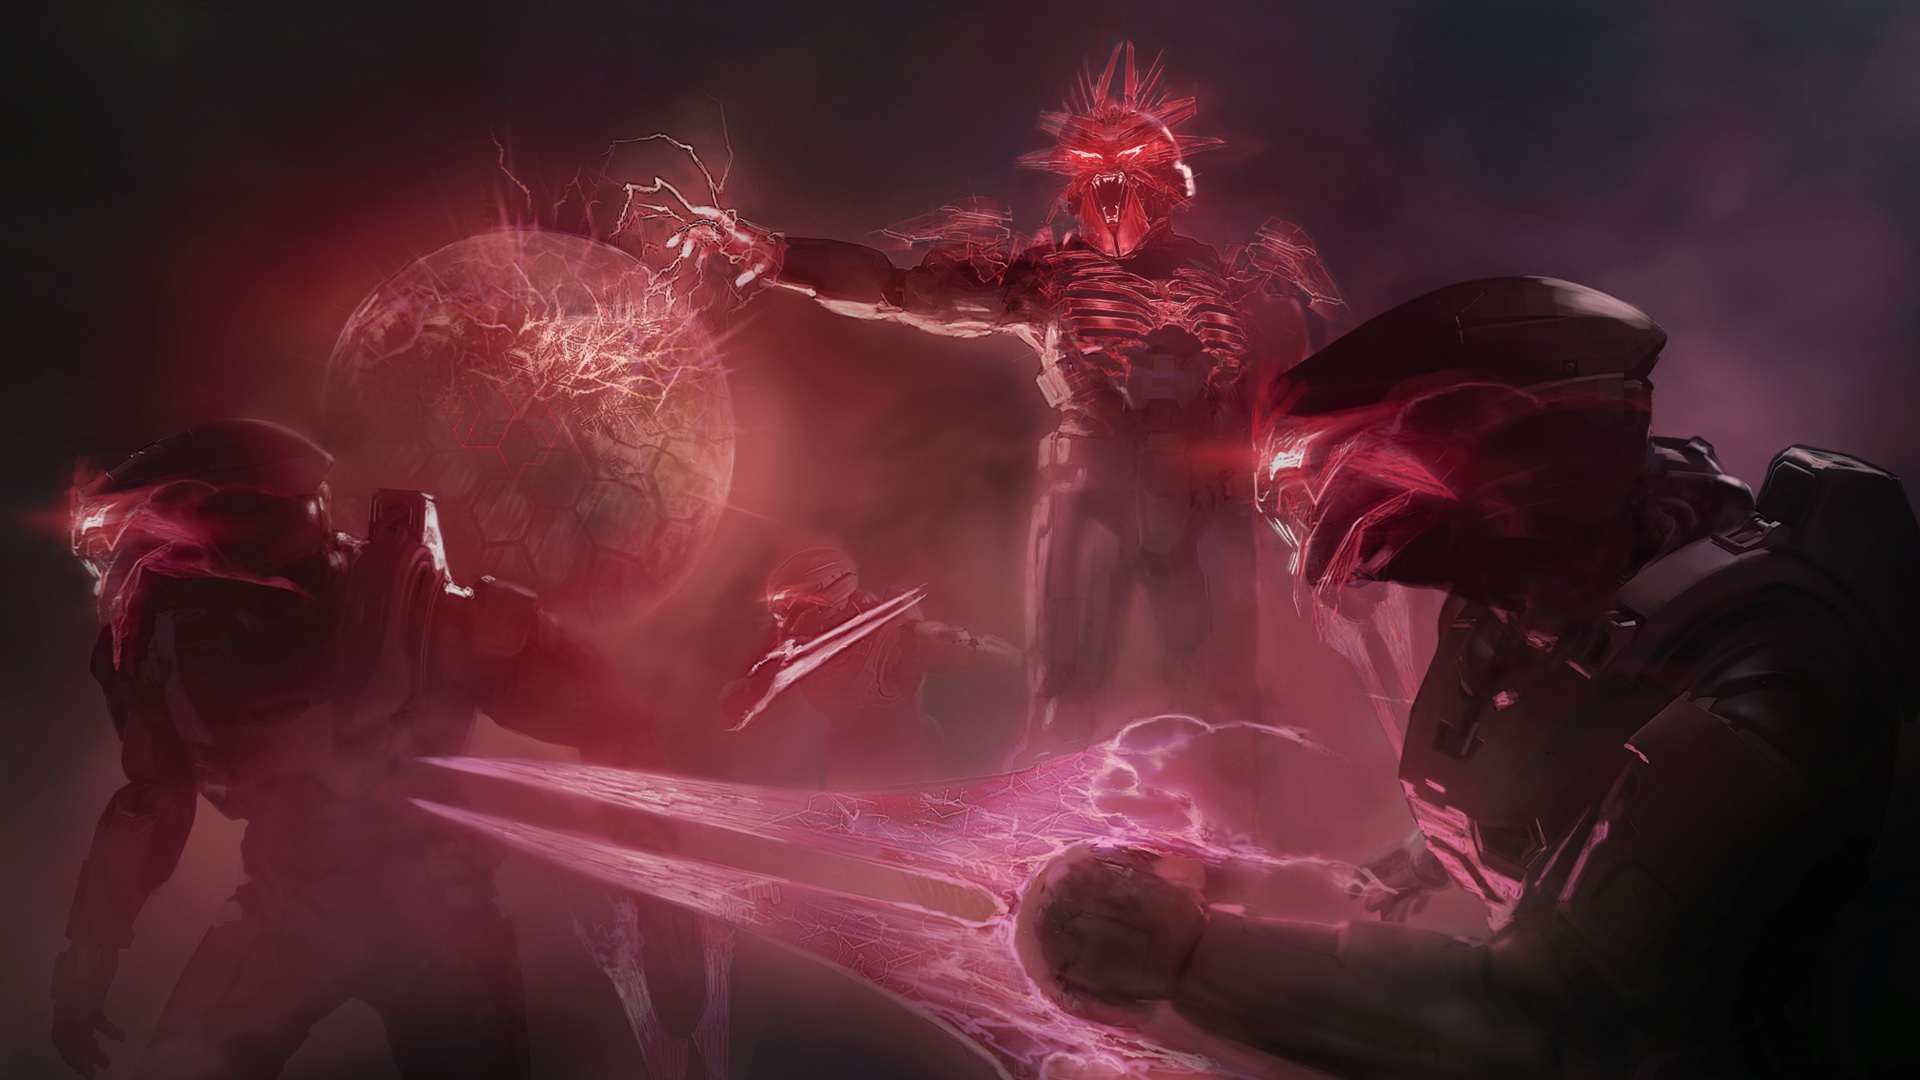 Halo Infinite concept art for the Infection mode showing three Spartans infected by Iratus